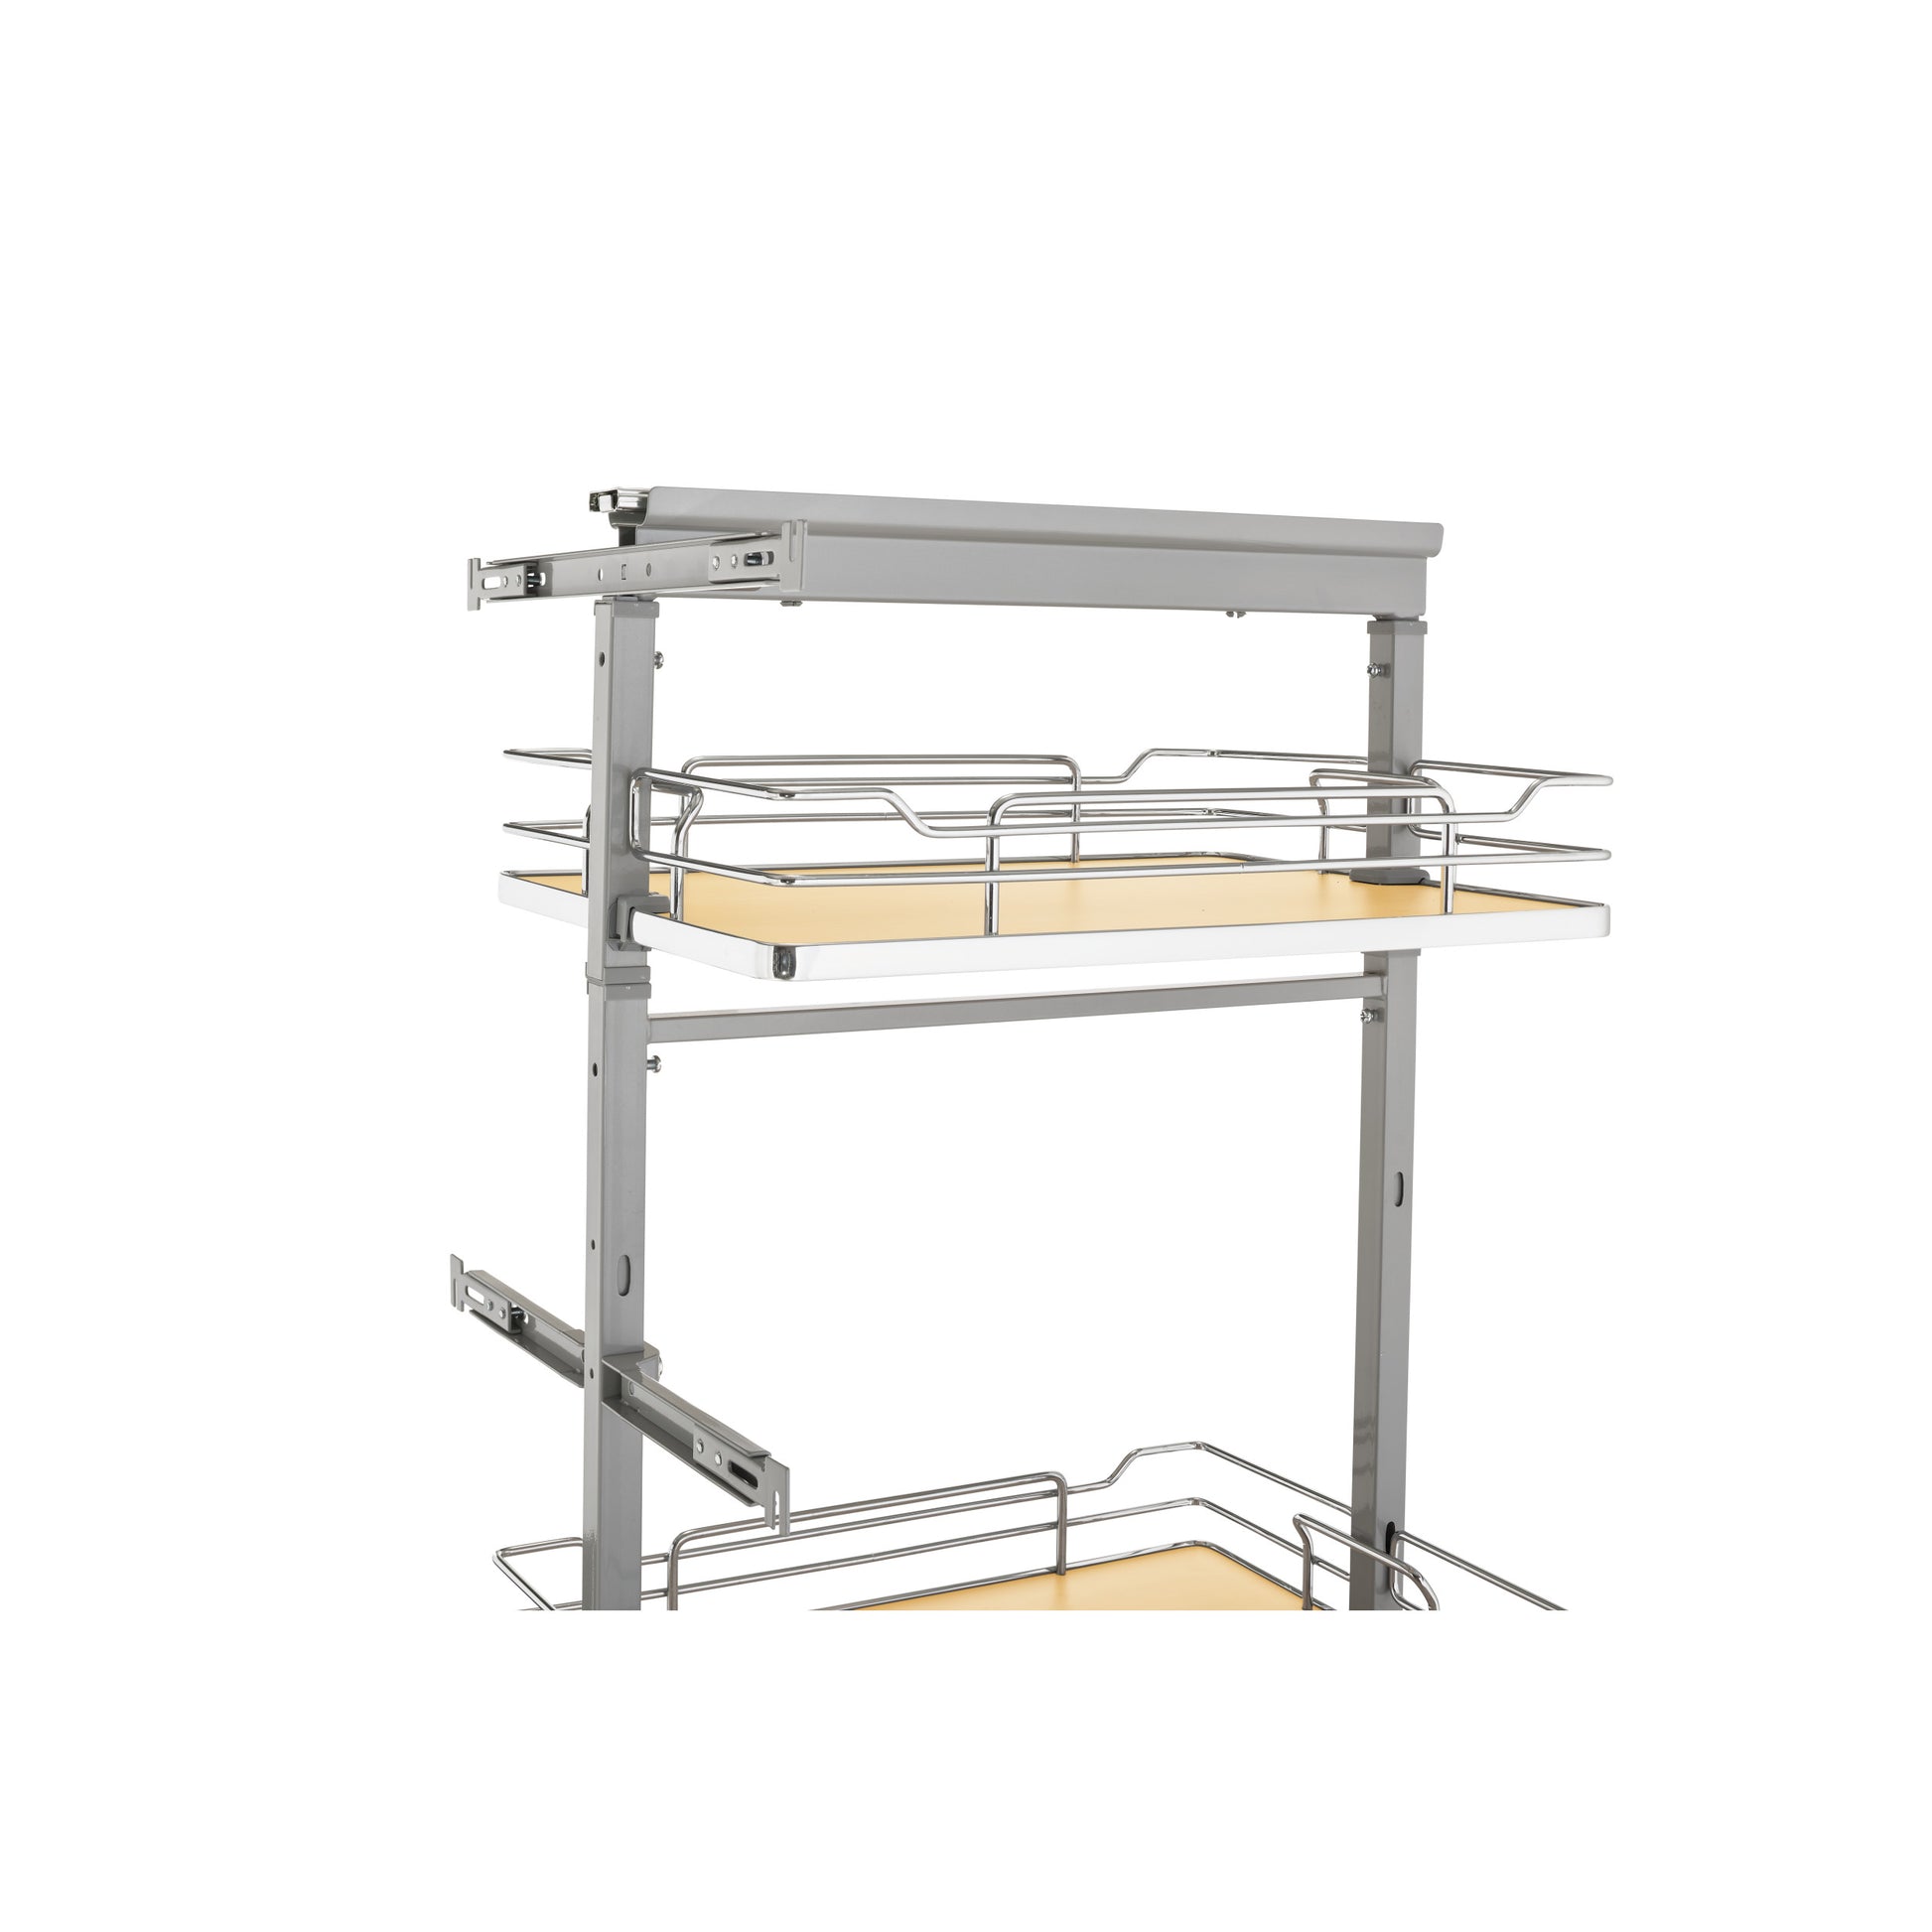 Rev-A-Shelf - Adjustable Solid Surface Pantry System for Tall Pantry Cabinets - 5350-16-GR